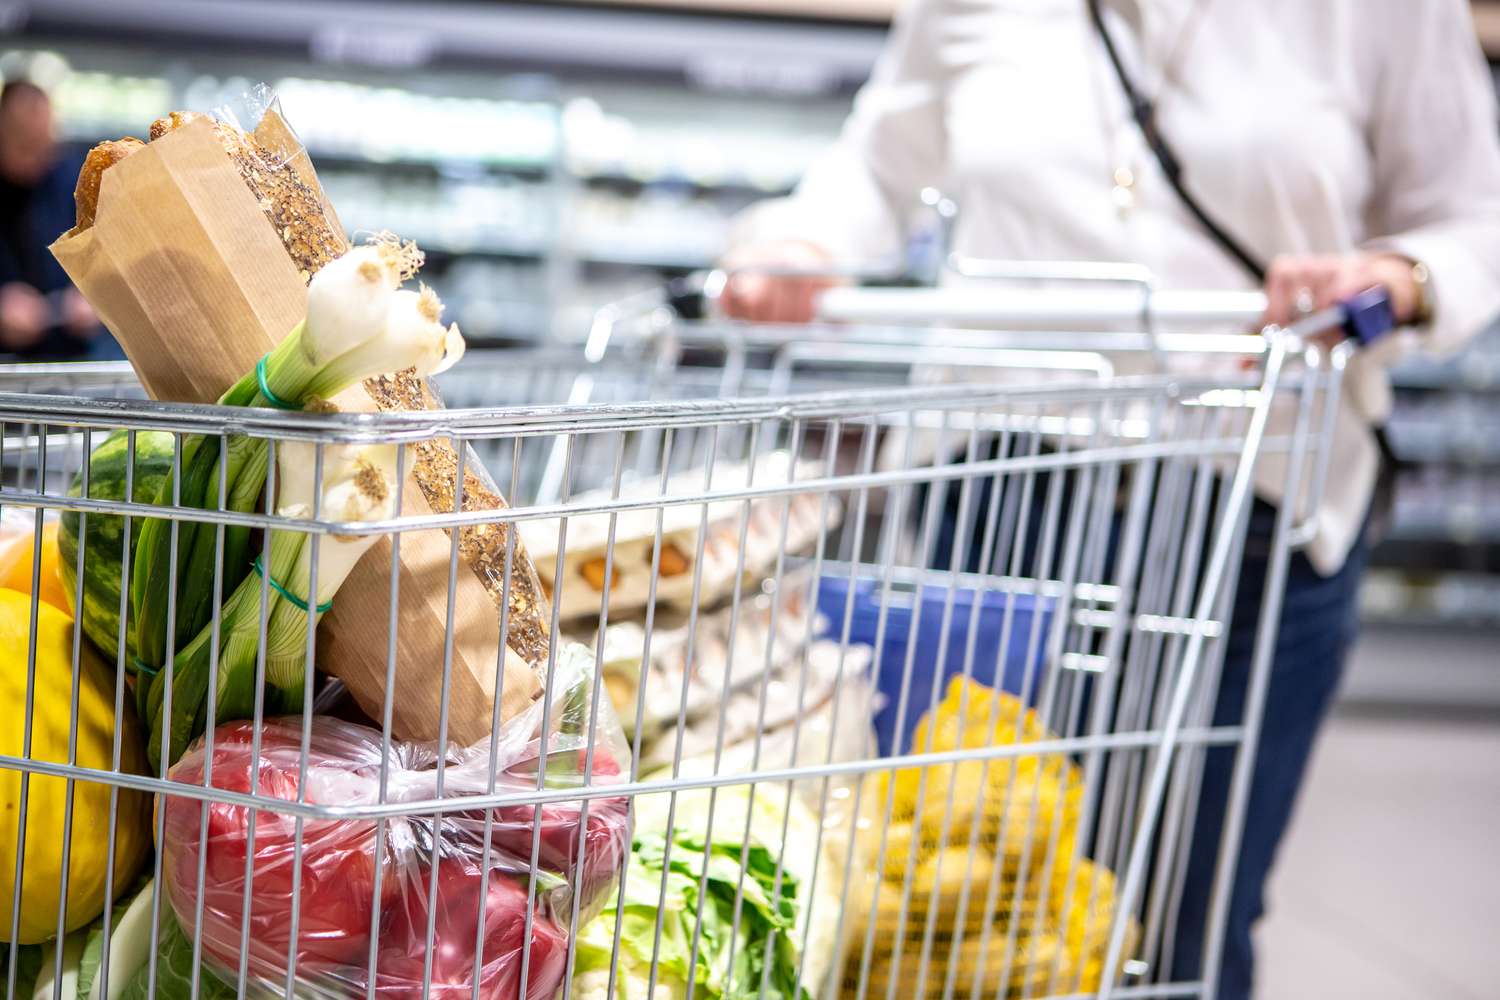 Learn to shop for well-priced groceries